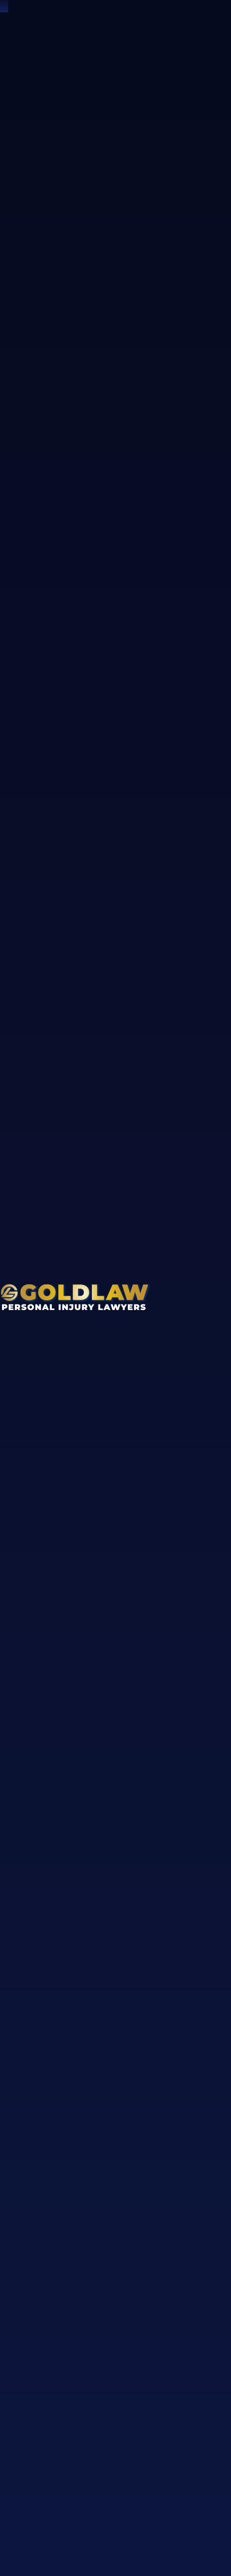 The Law Offices of Craig Goldenfarb, P.A. - West Palm Beach FL Lawyers